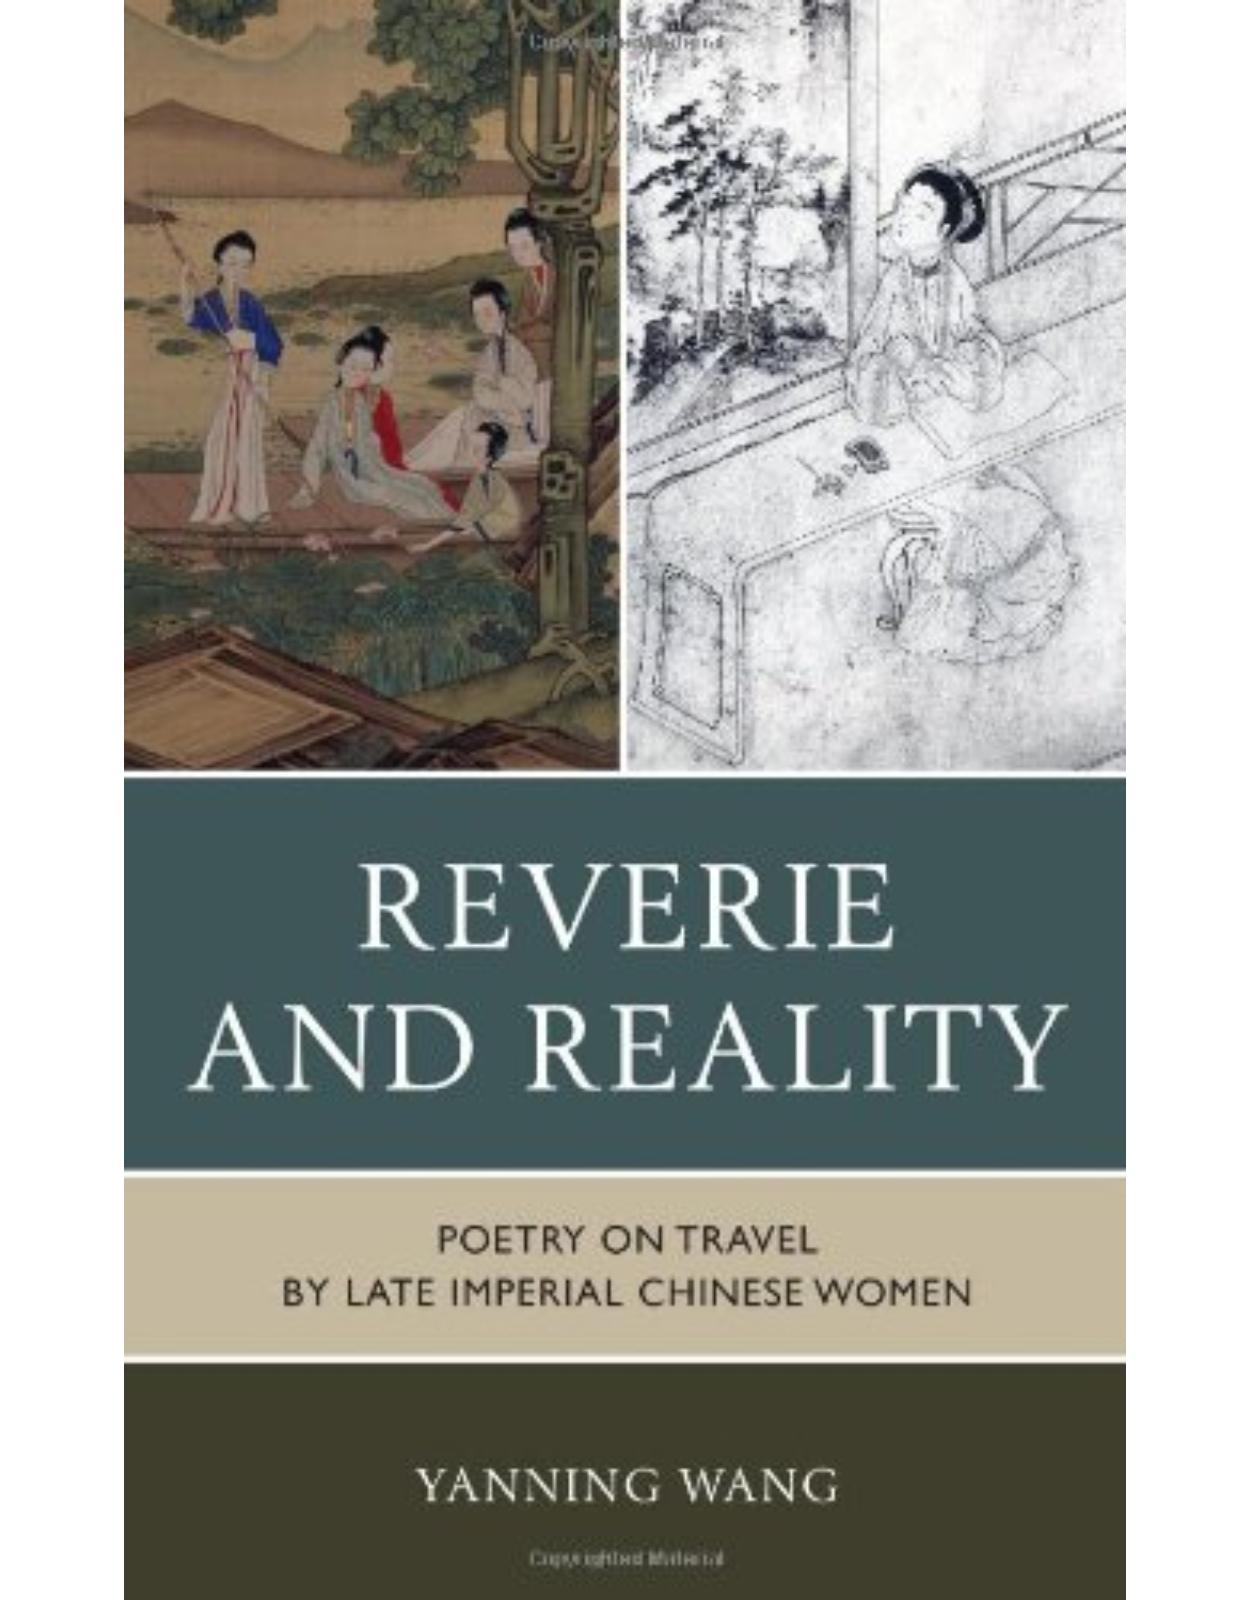 Reverie and Reality: Poetry on Travel by Late Imperial Chinese Women